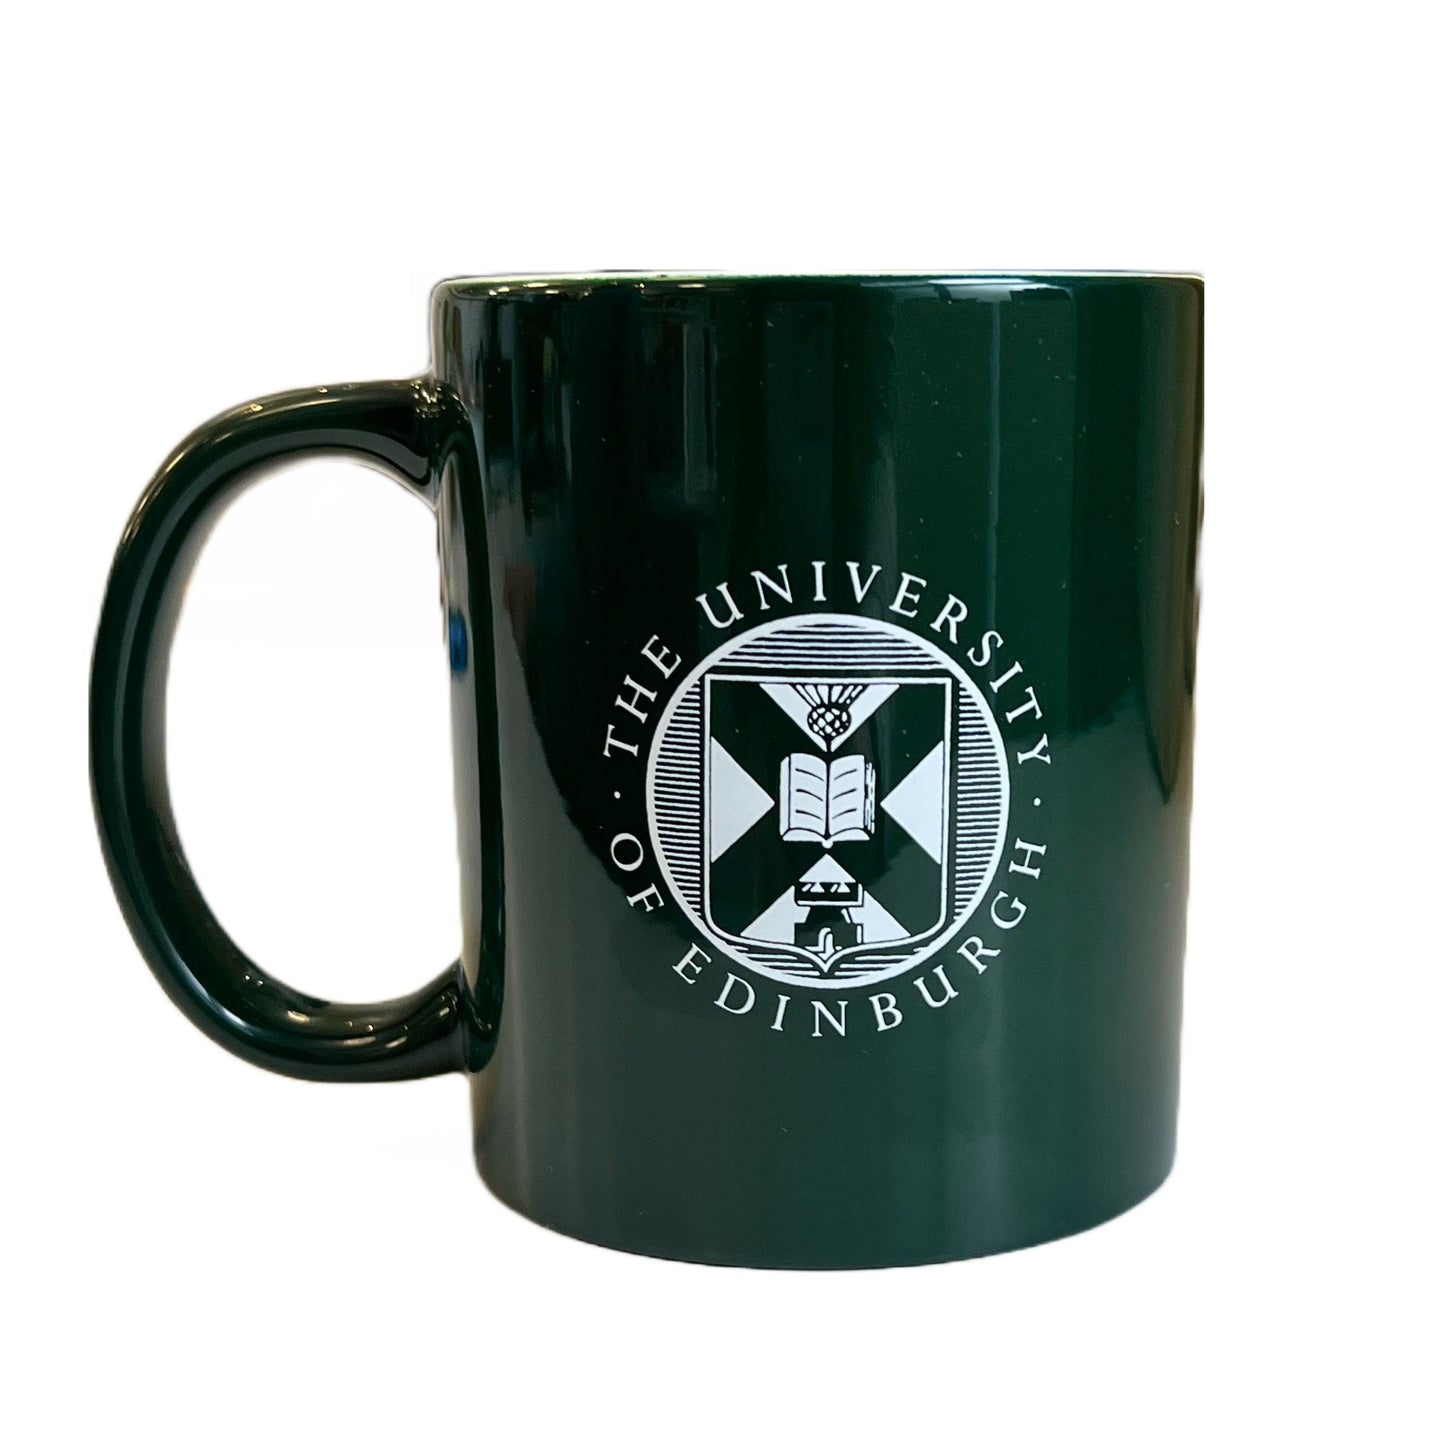 reverse side of green mug with university crest in white